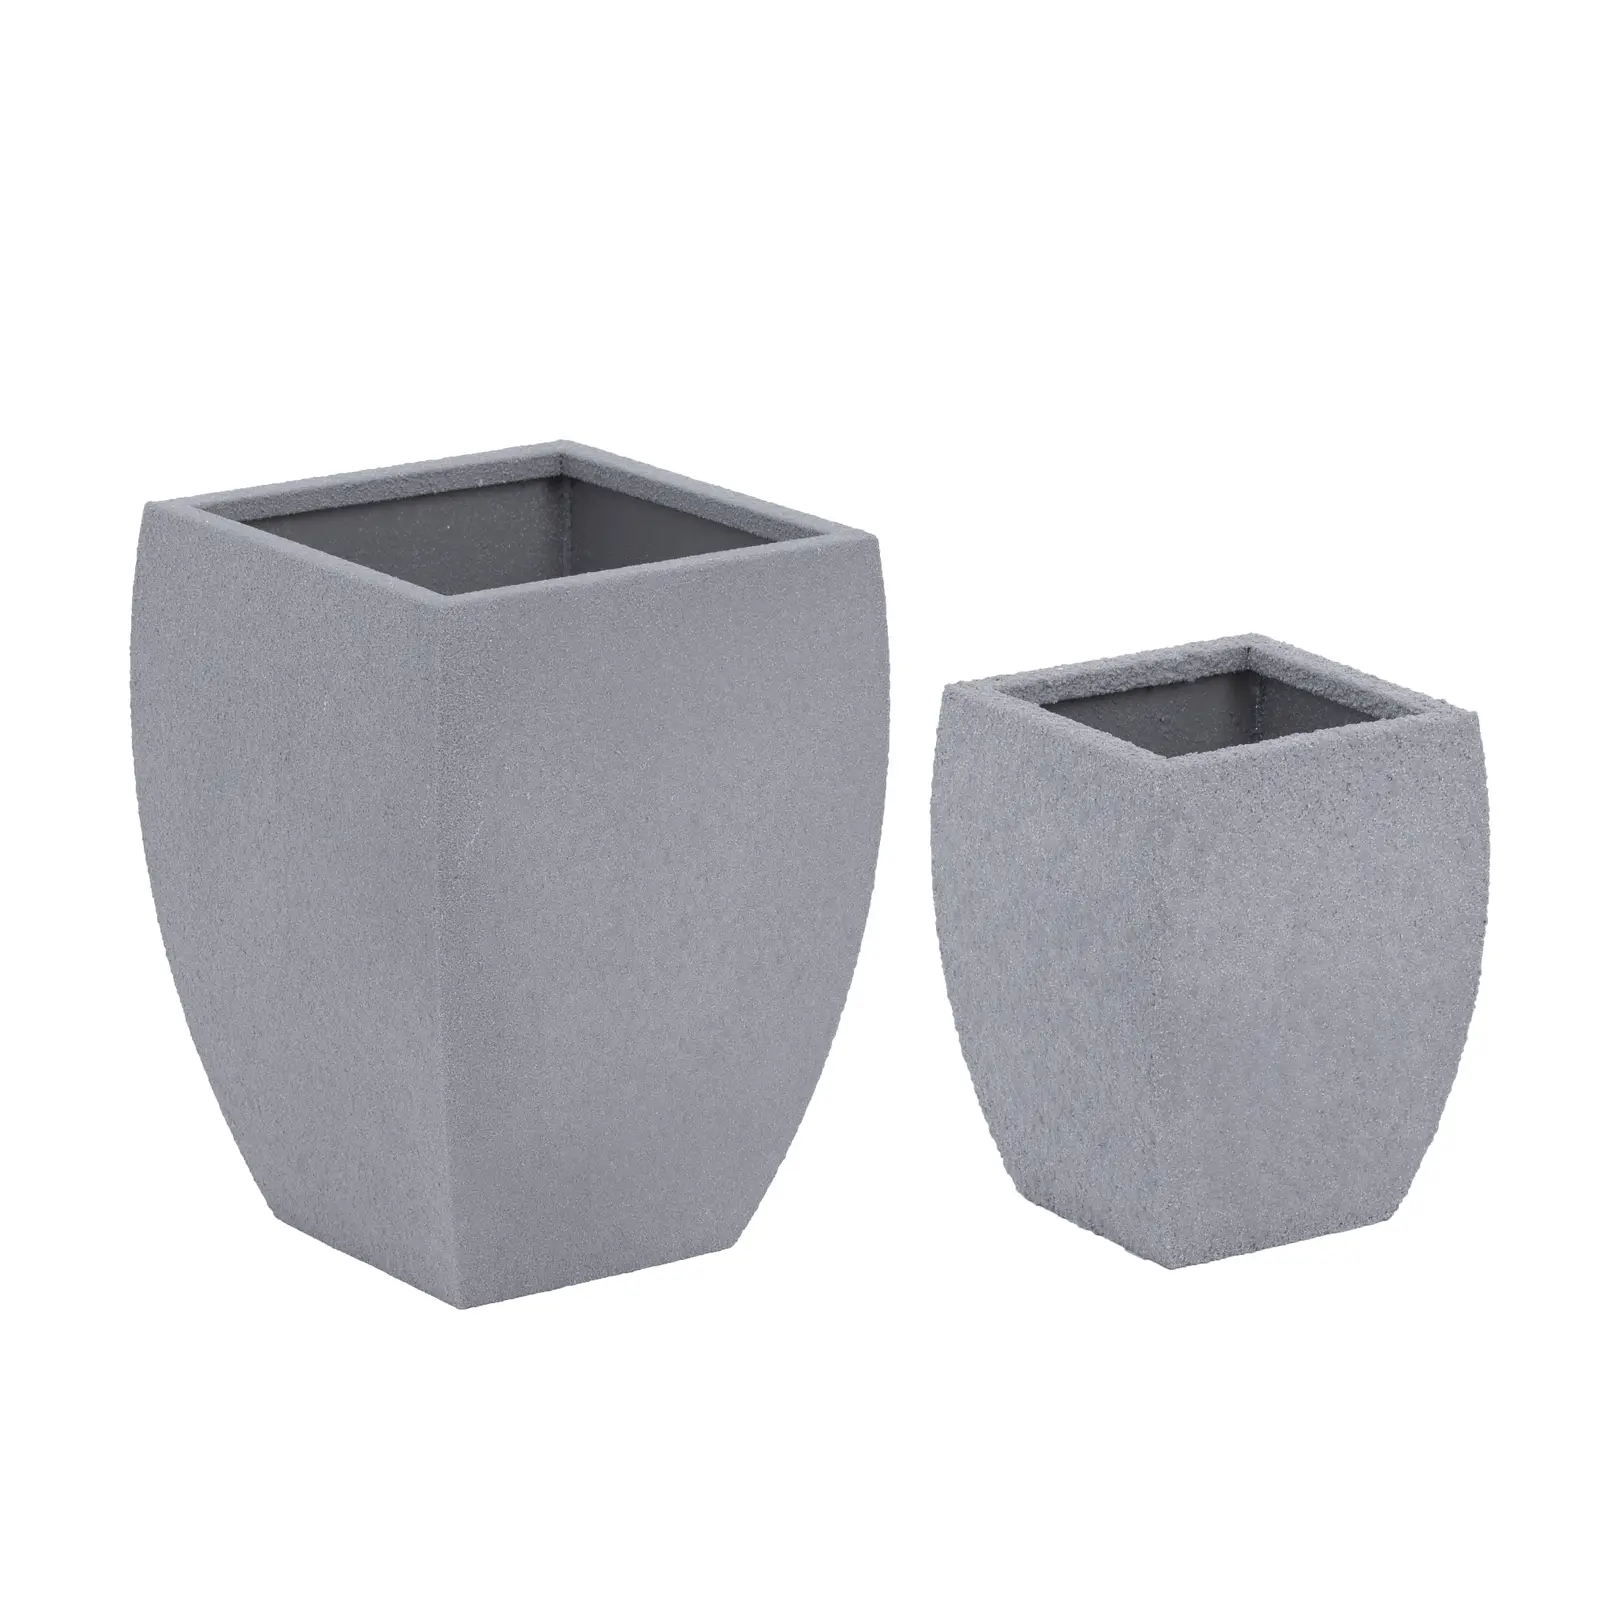 Planter Pot - Set of 2 - Corten steel - conical / rounded - Royal Catering